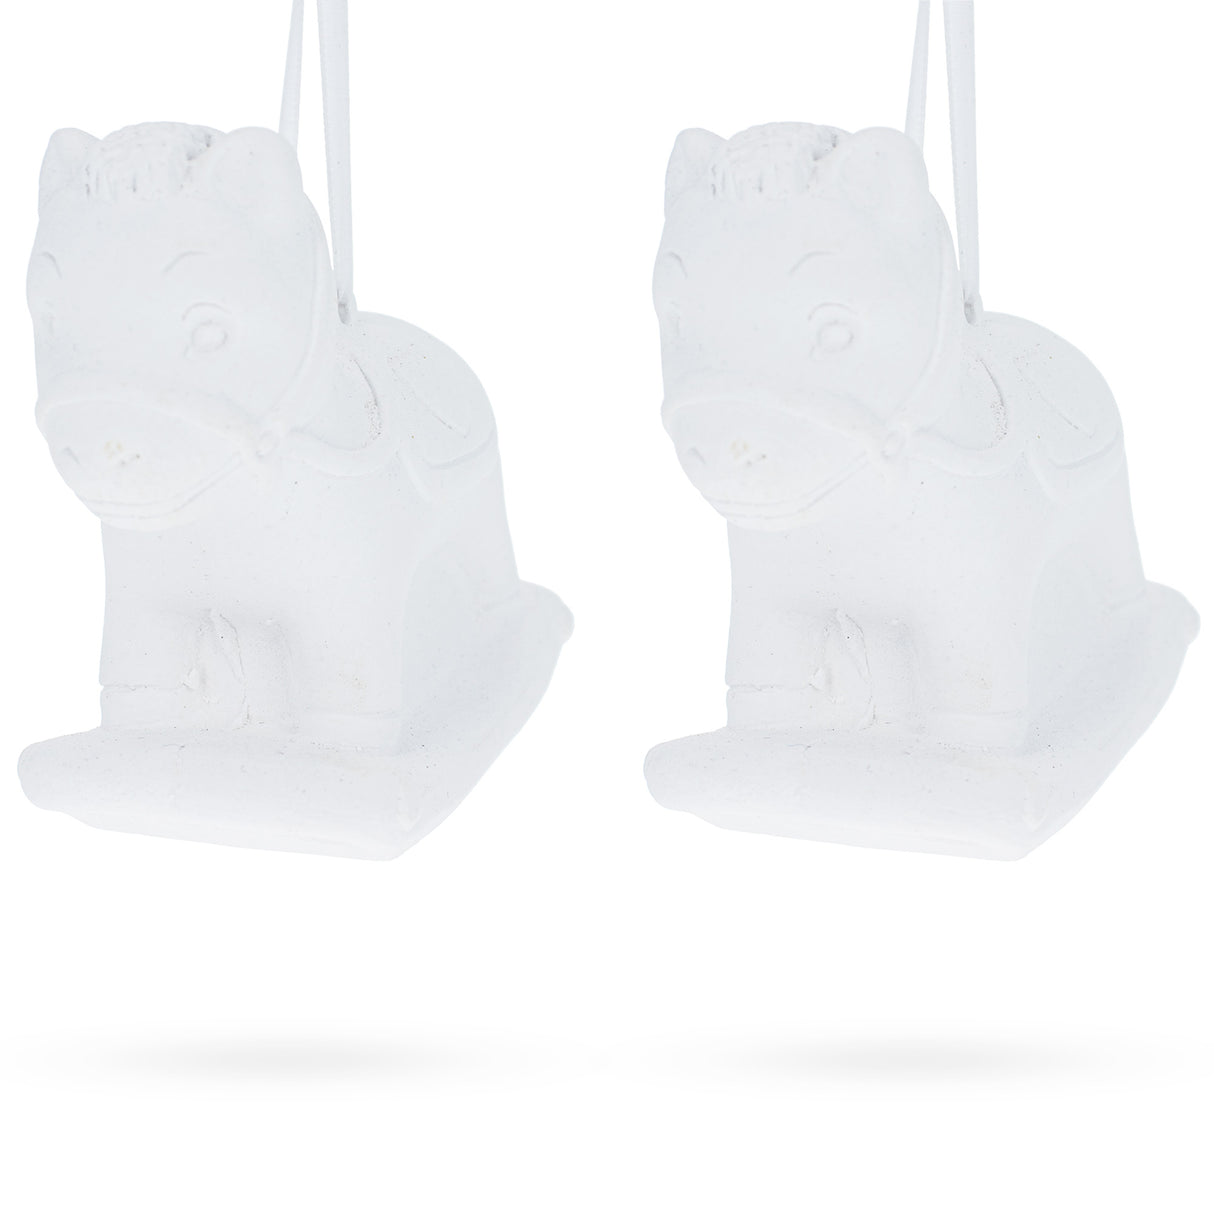 Set of 2 Unfinished Unpainted Blank White Plaster Rocking Horse Ornaments 3.5 Inches in White color,  shape